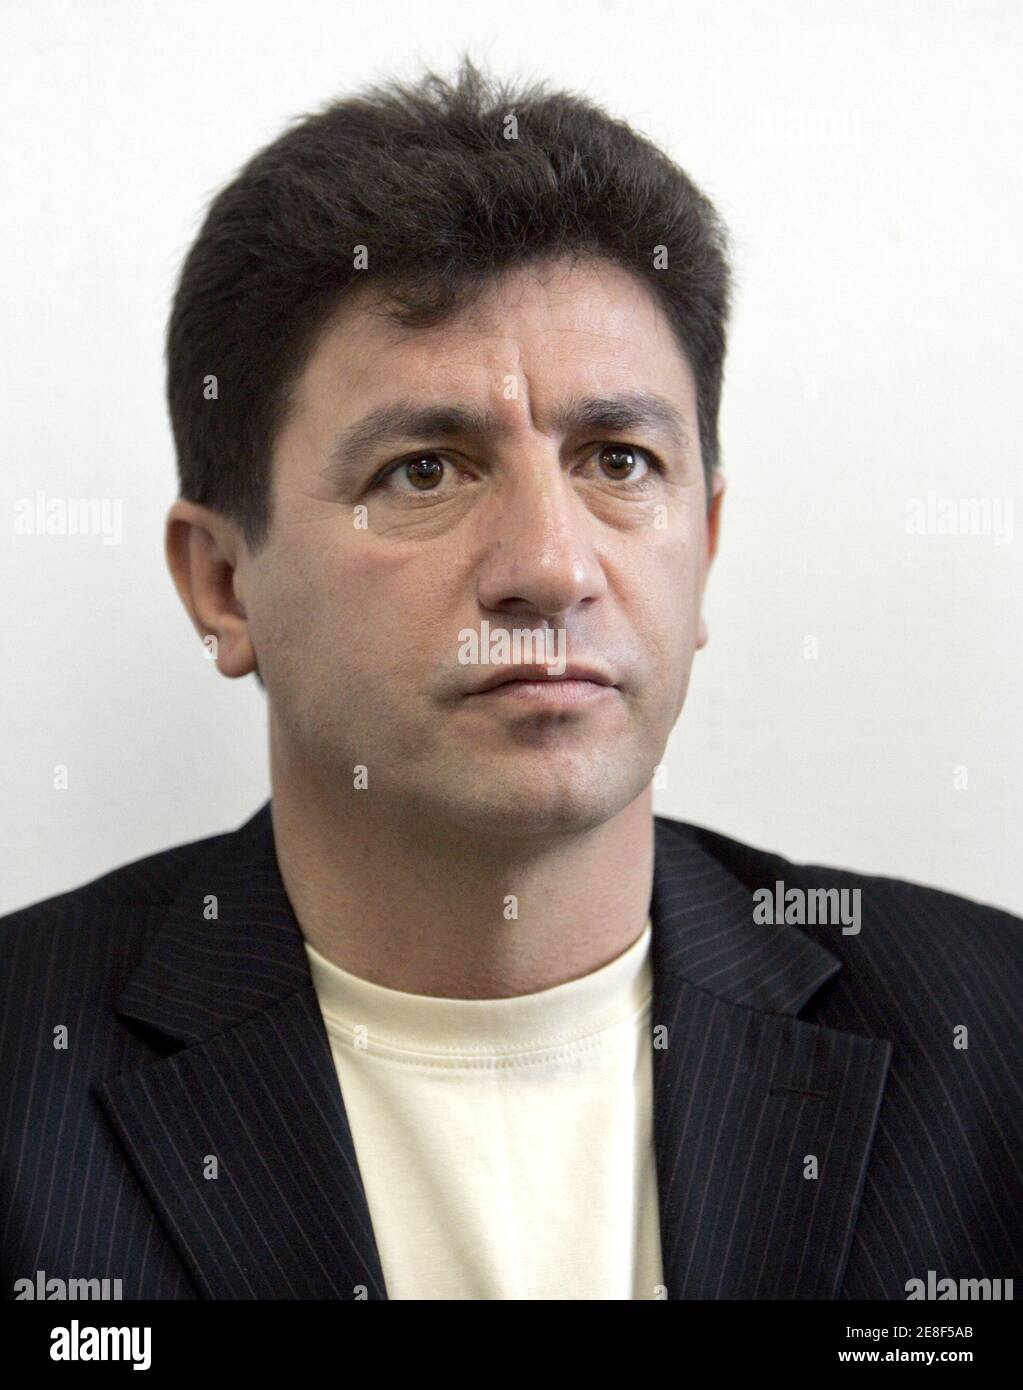 Amir Qalenoei attends his first media conference as head coach of Iran's national soccer team in Tehran July 23, 2006. Qalenoei replaced Branco Ivankovic after Iran's poor showing at the World Cup in Germany.  REUTERS/Raheb Homavandi (IRAN) Stock Photo